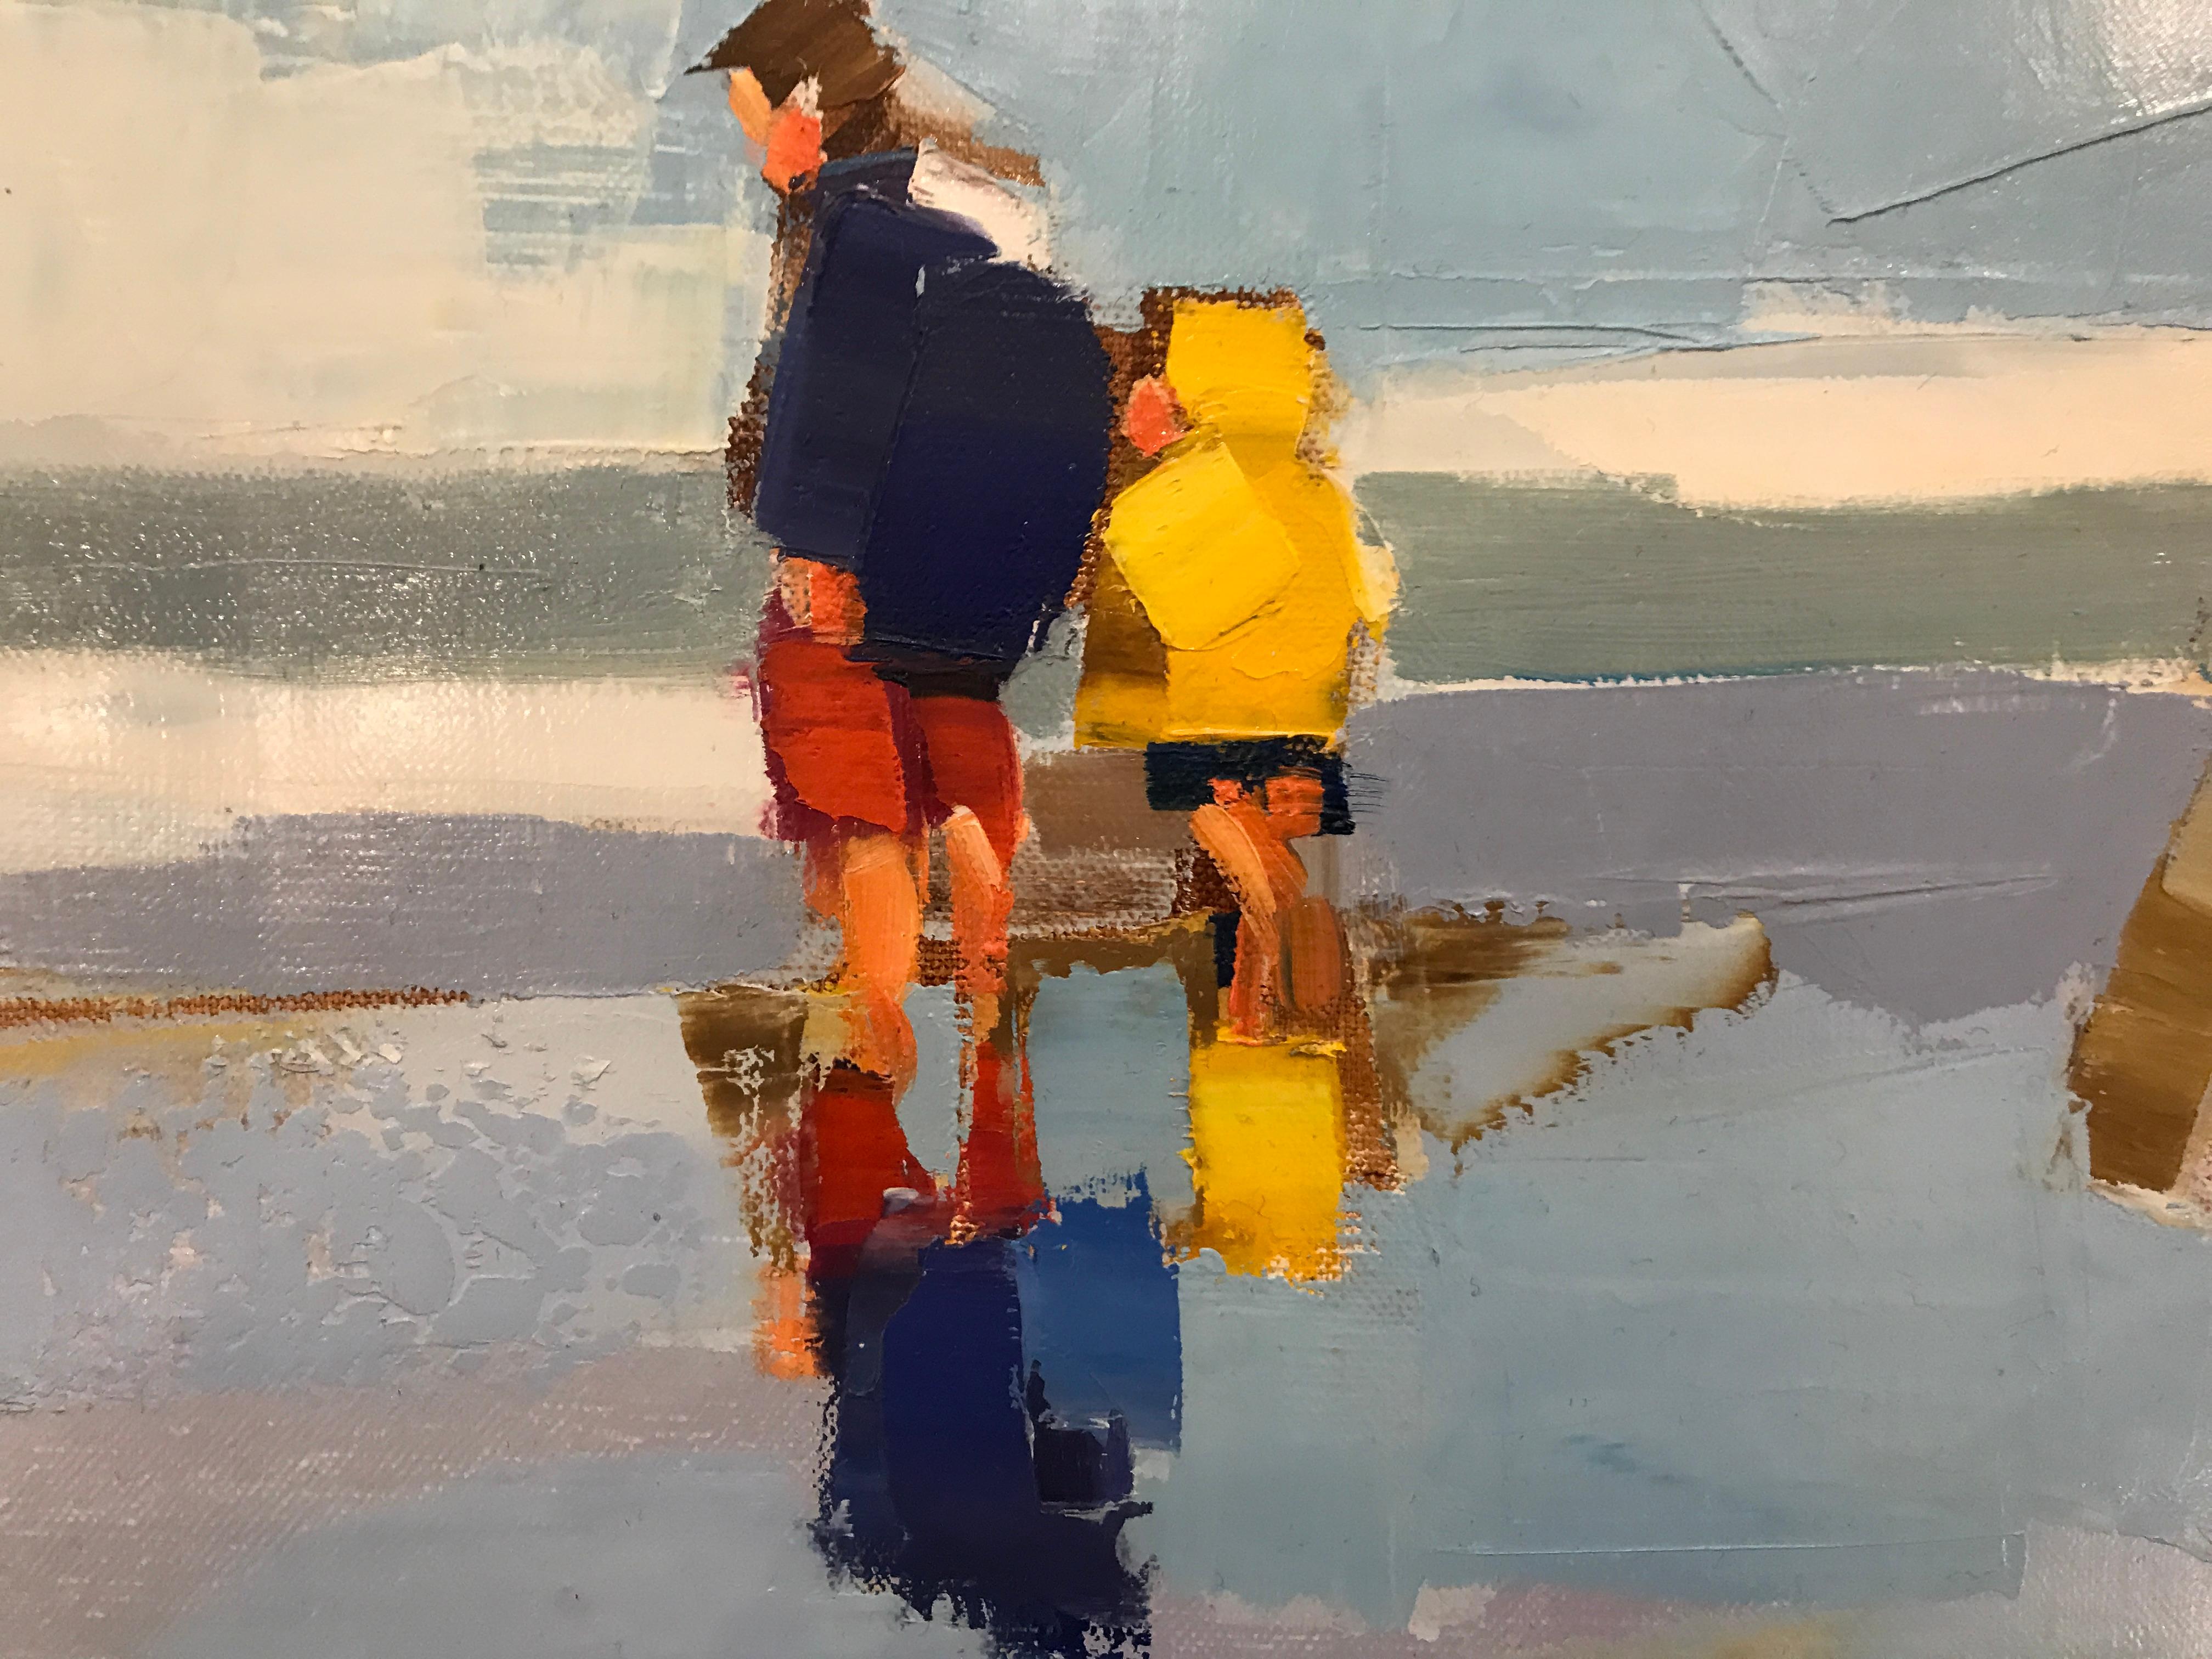 'A la Pêche Rayé Bleu et Blanc' is a medium size Impressionist beach painting created by Polish-born artist Ewa Rzeznik in 2018. Featuring an exquisite scene set on a French beach, the painting depicts two adorable children, dressed in beige and red